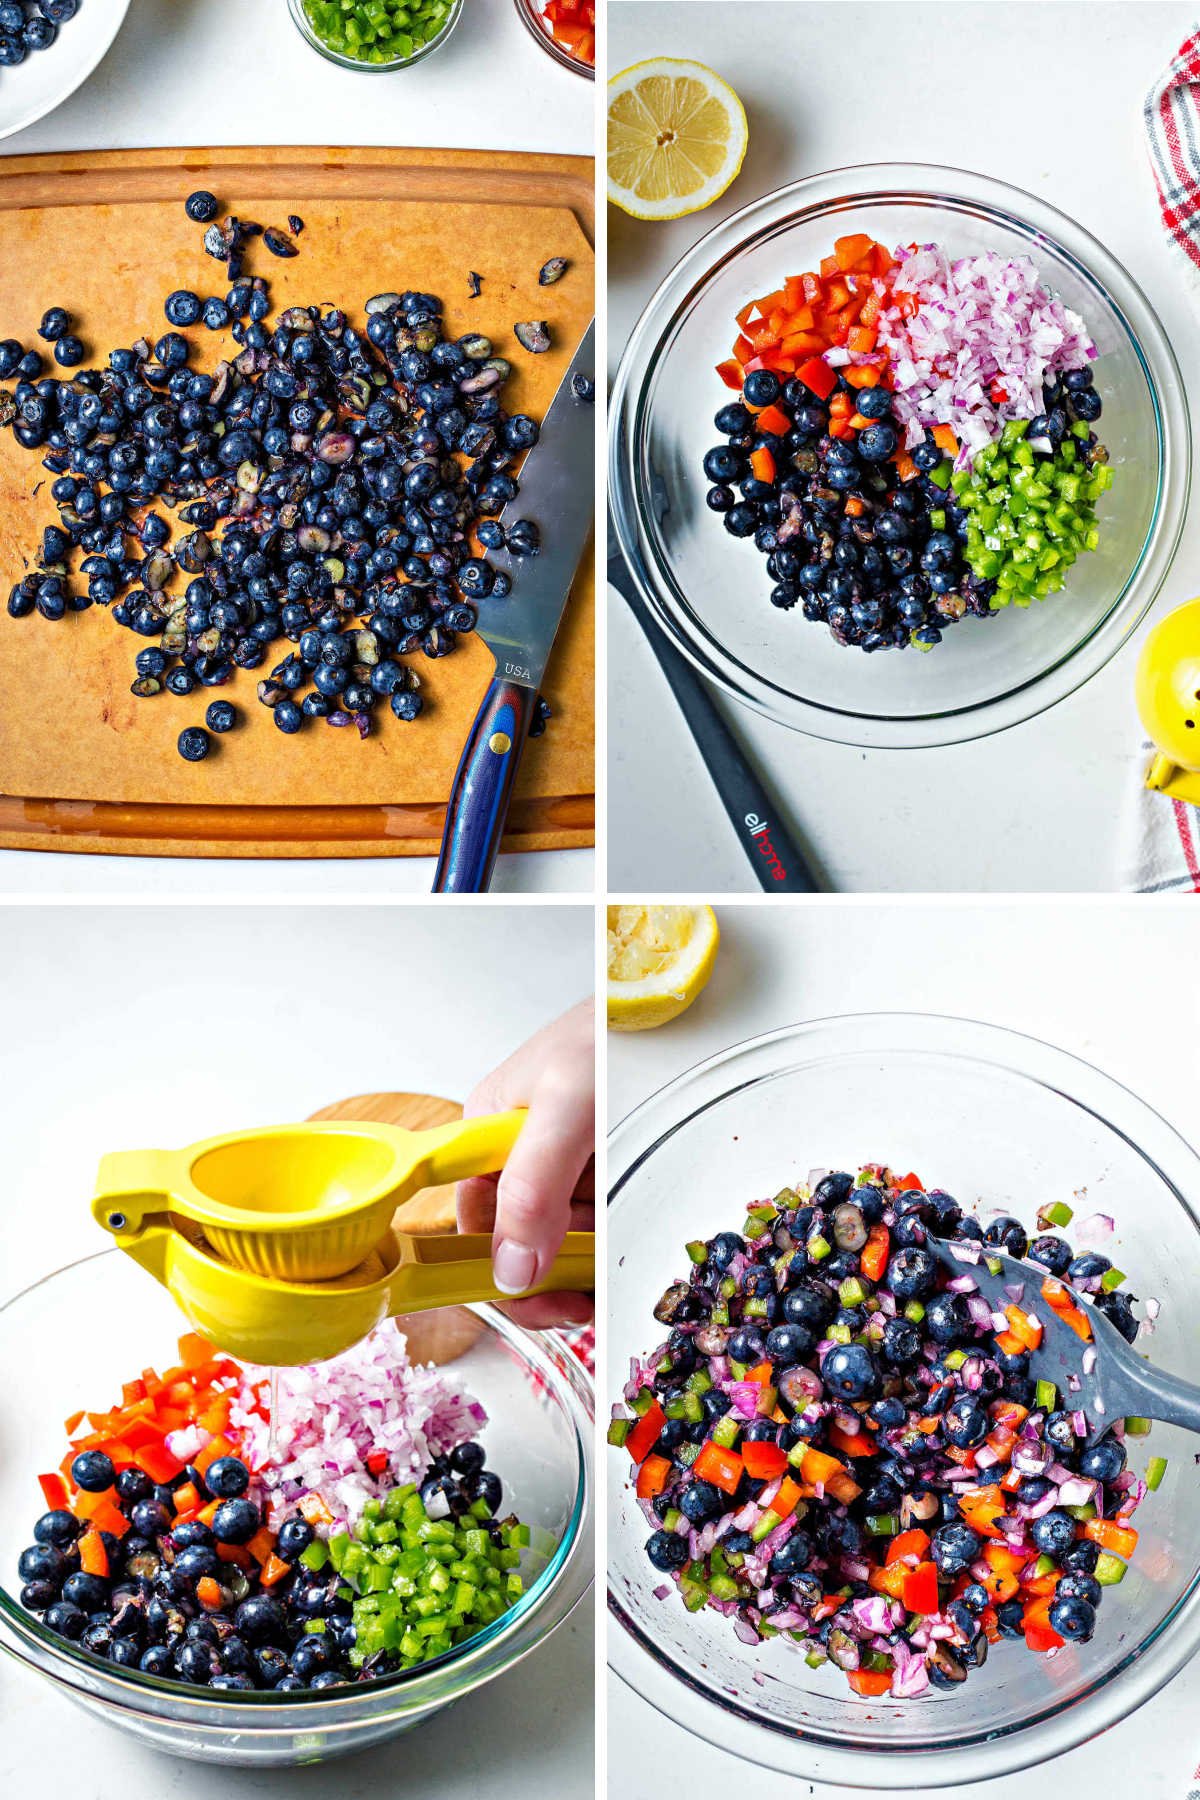 process steps for making blueberry salsa: roughly chop blueberries on a cutting board; mix with other ingredients; squeeze in lemon juice and stir.